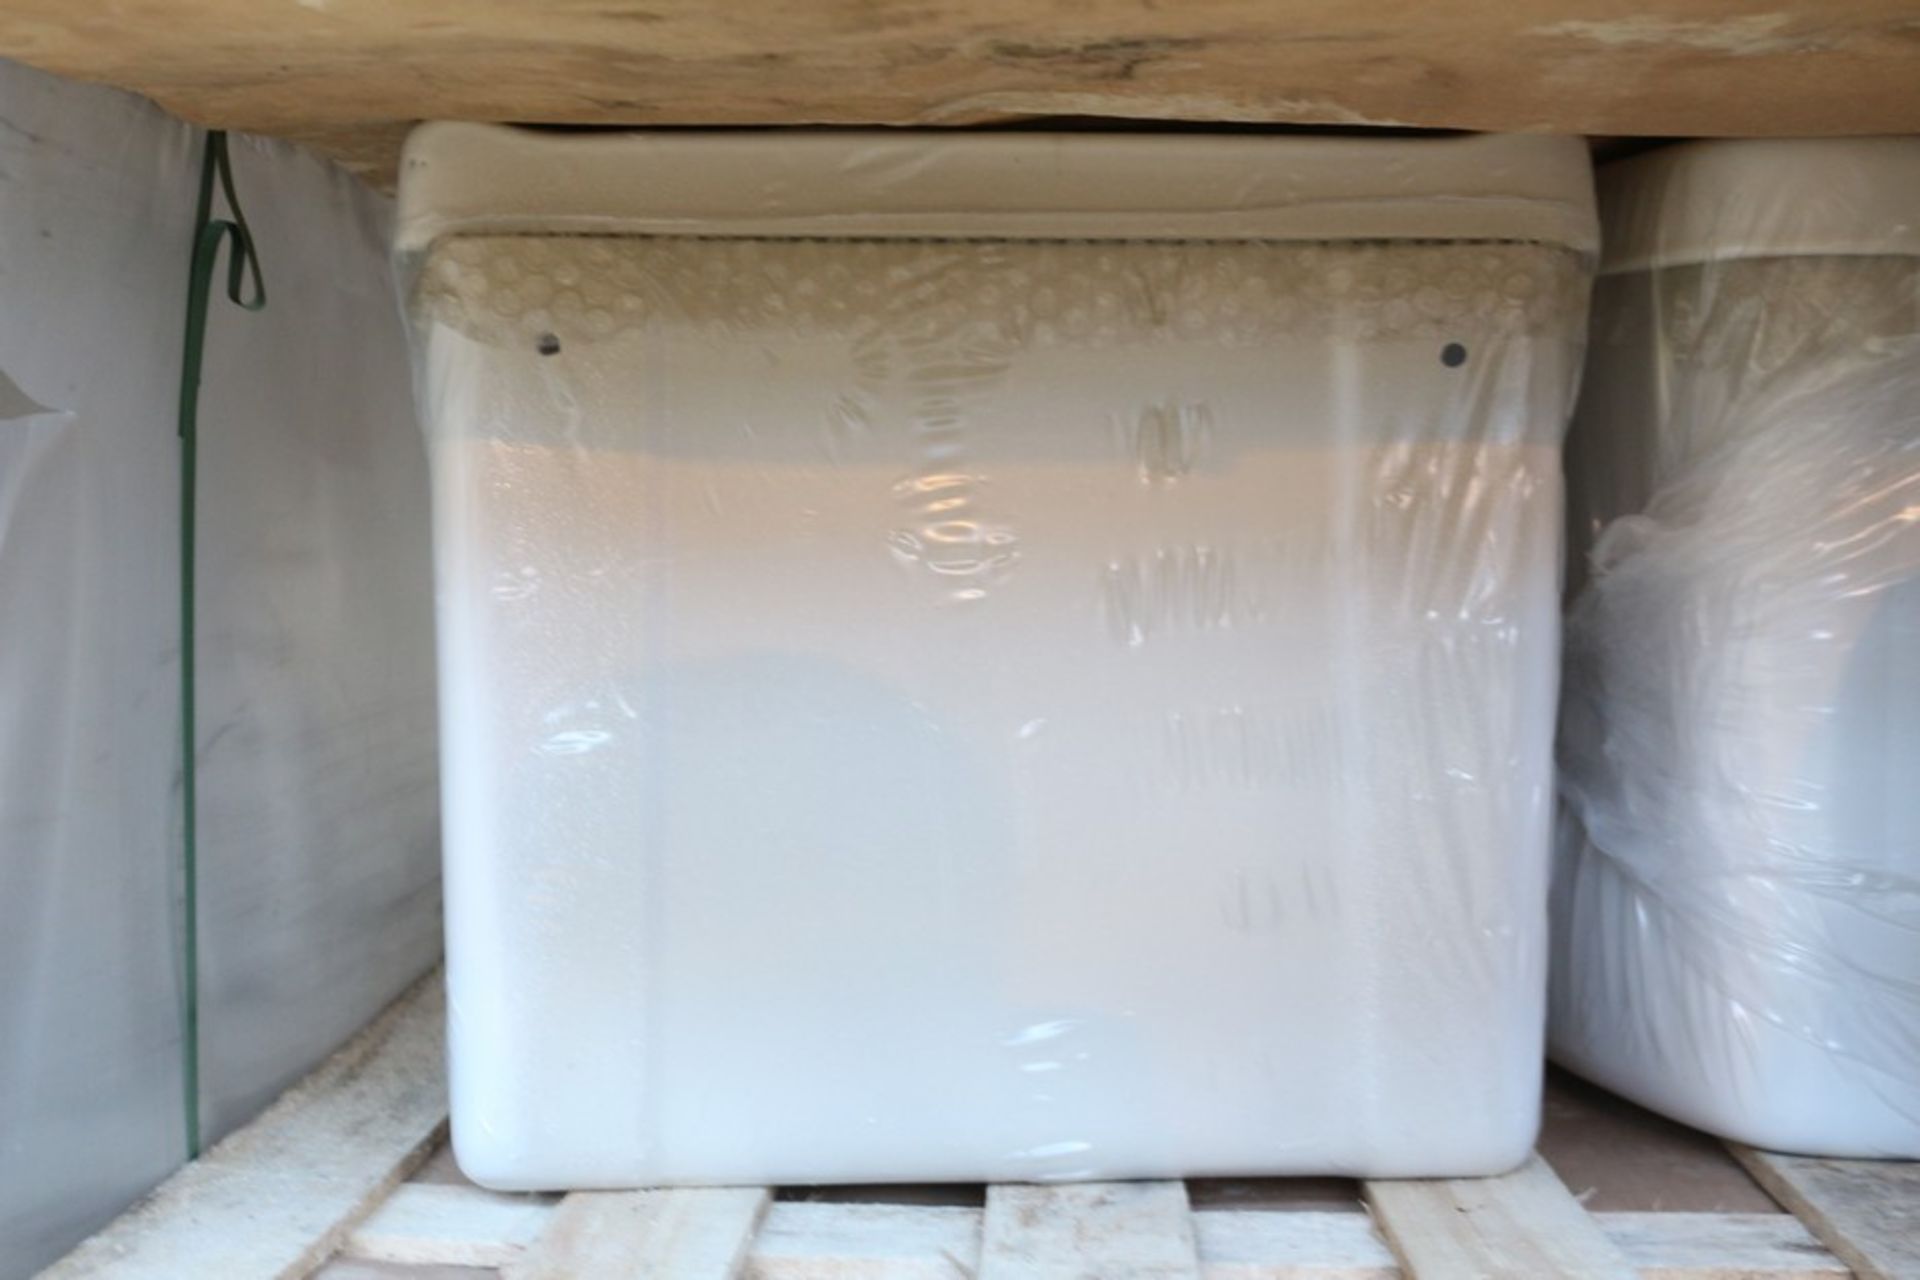 1X LOT TO CONTAIN 2 ASSORTED WHITE CERAMIC CISTERNS COMBINED RRP £55 (DS-K&N) (BAU 716) (04.12.17)